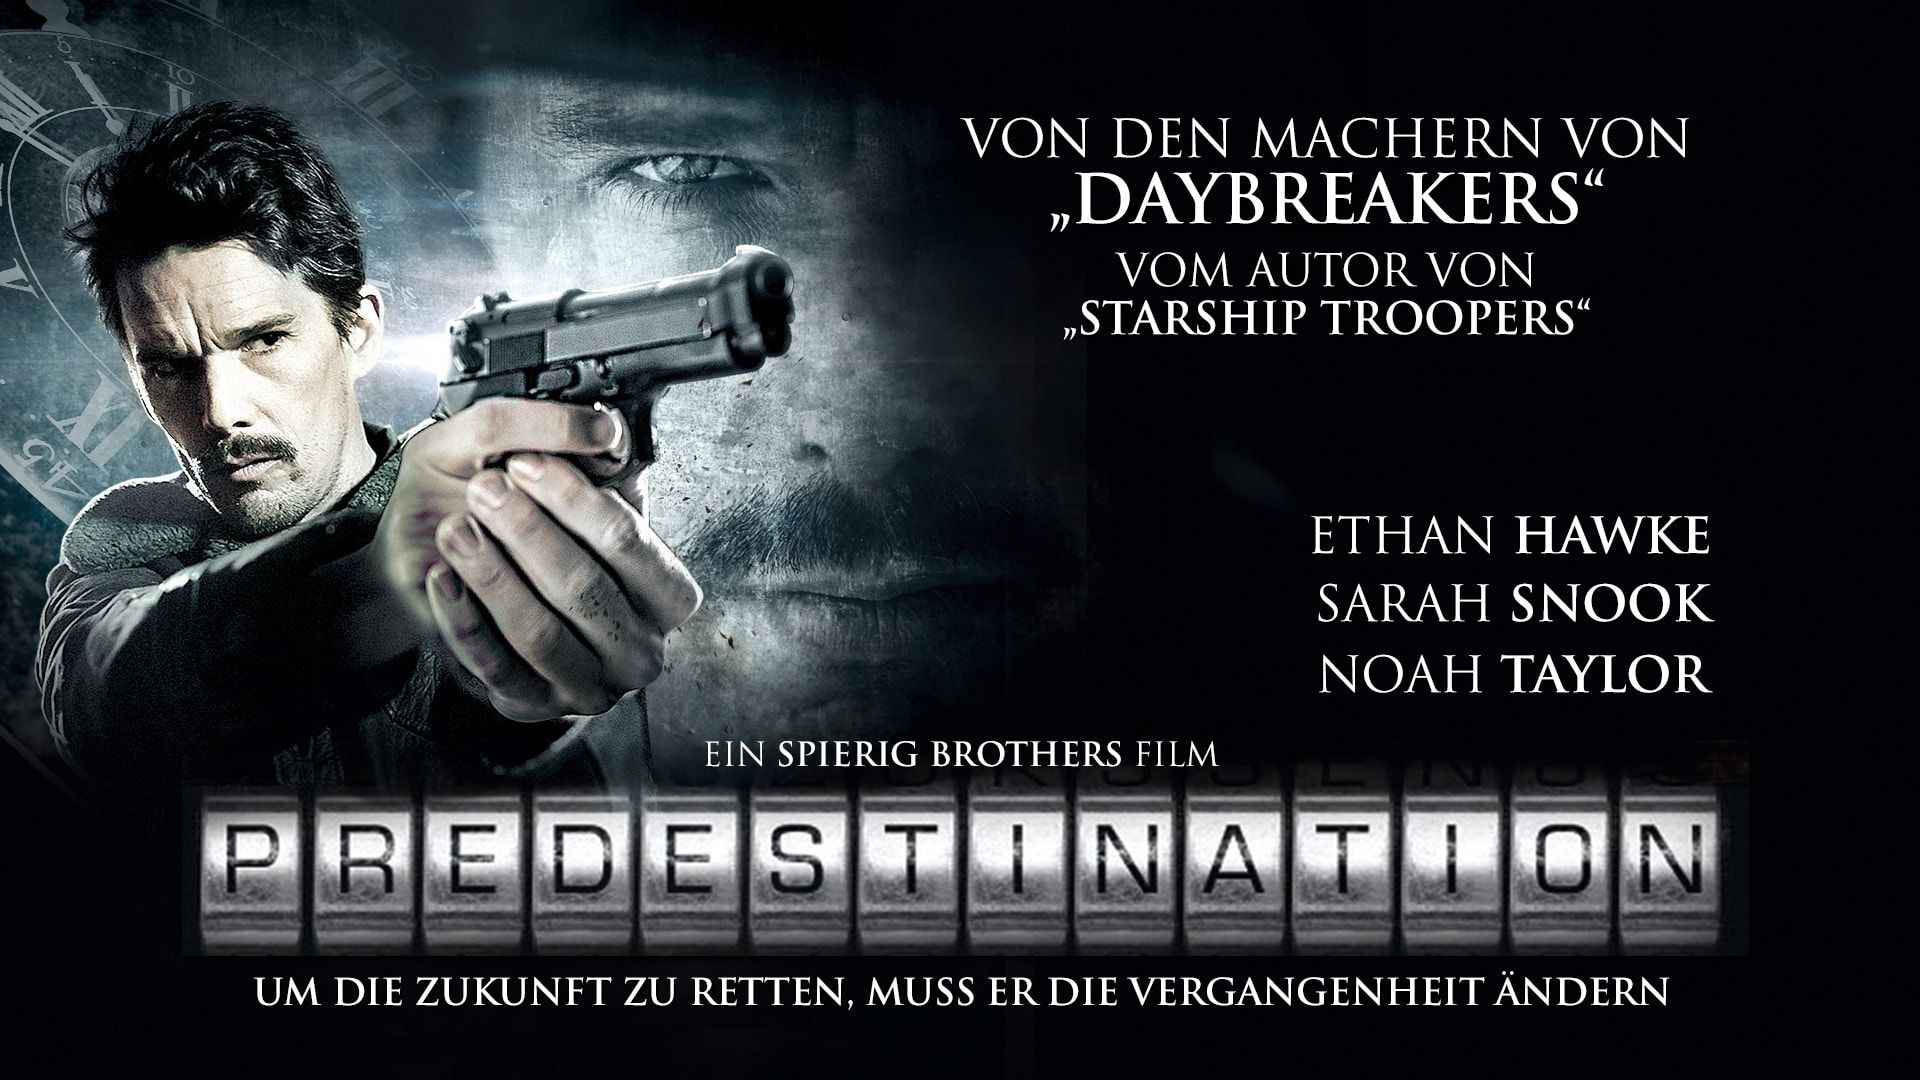 Image gallery for Predestination 2014  Filmaffinity